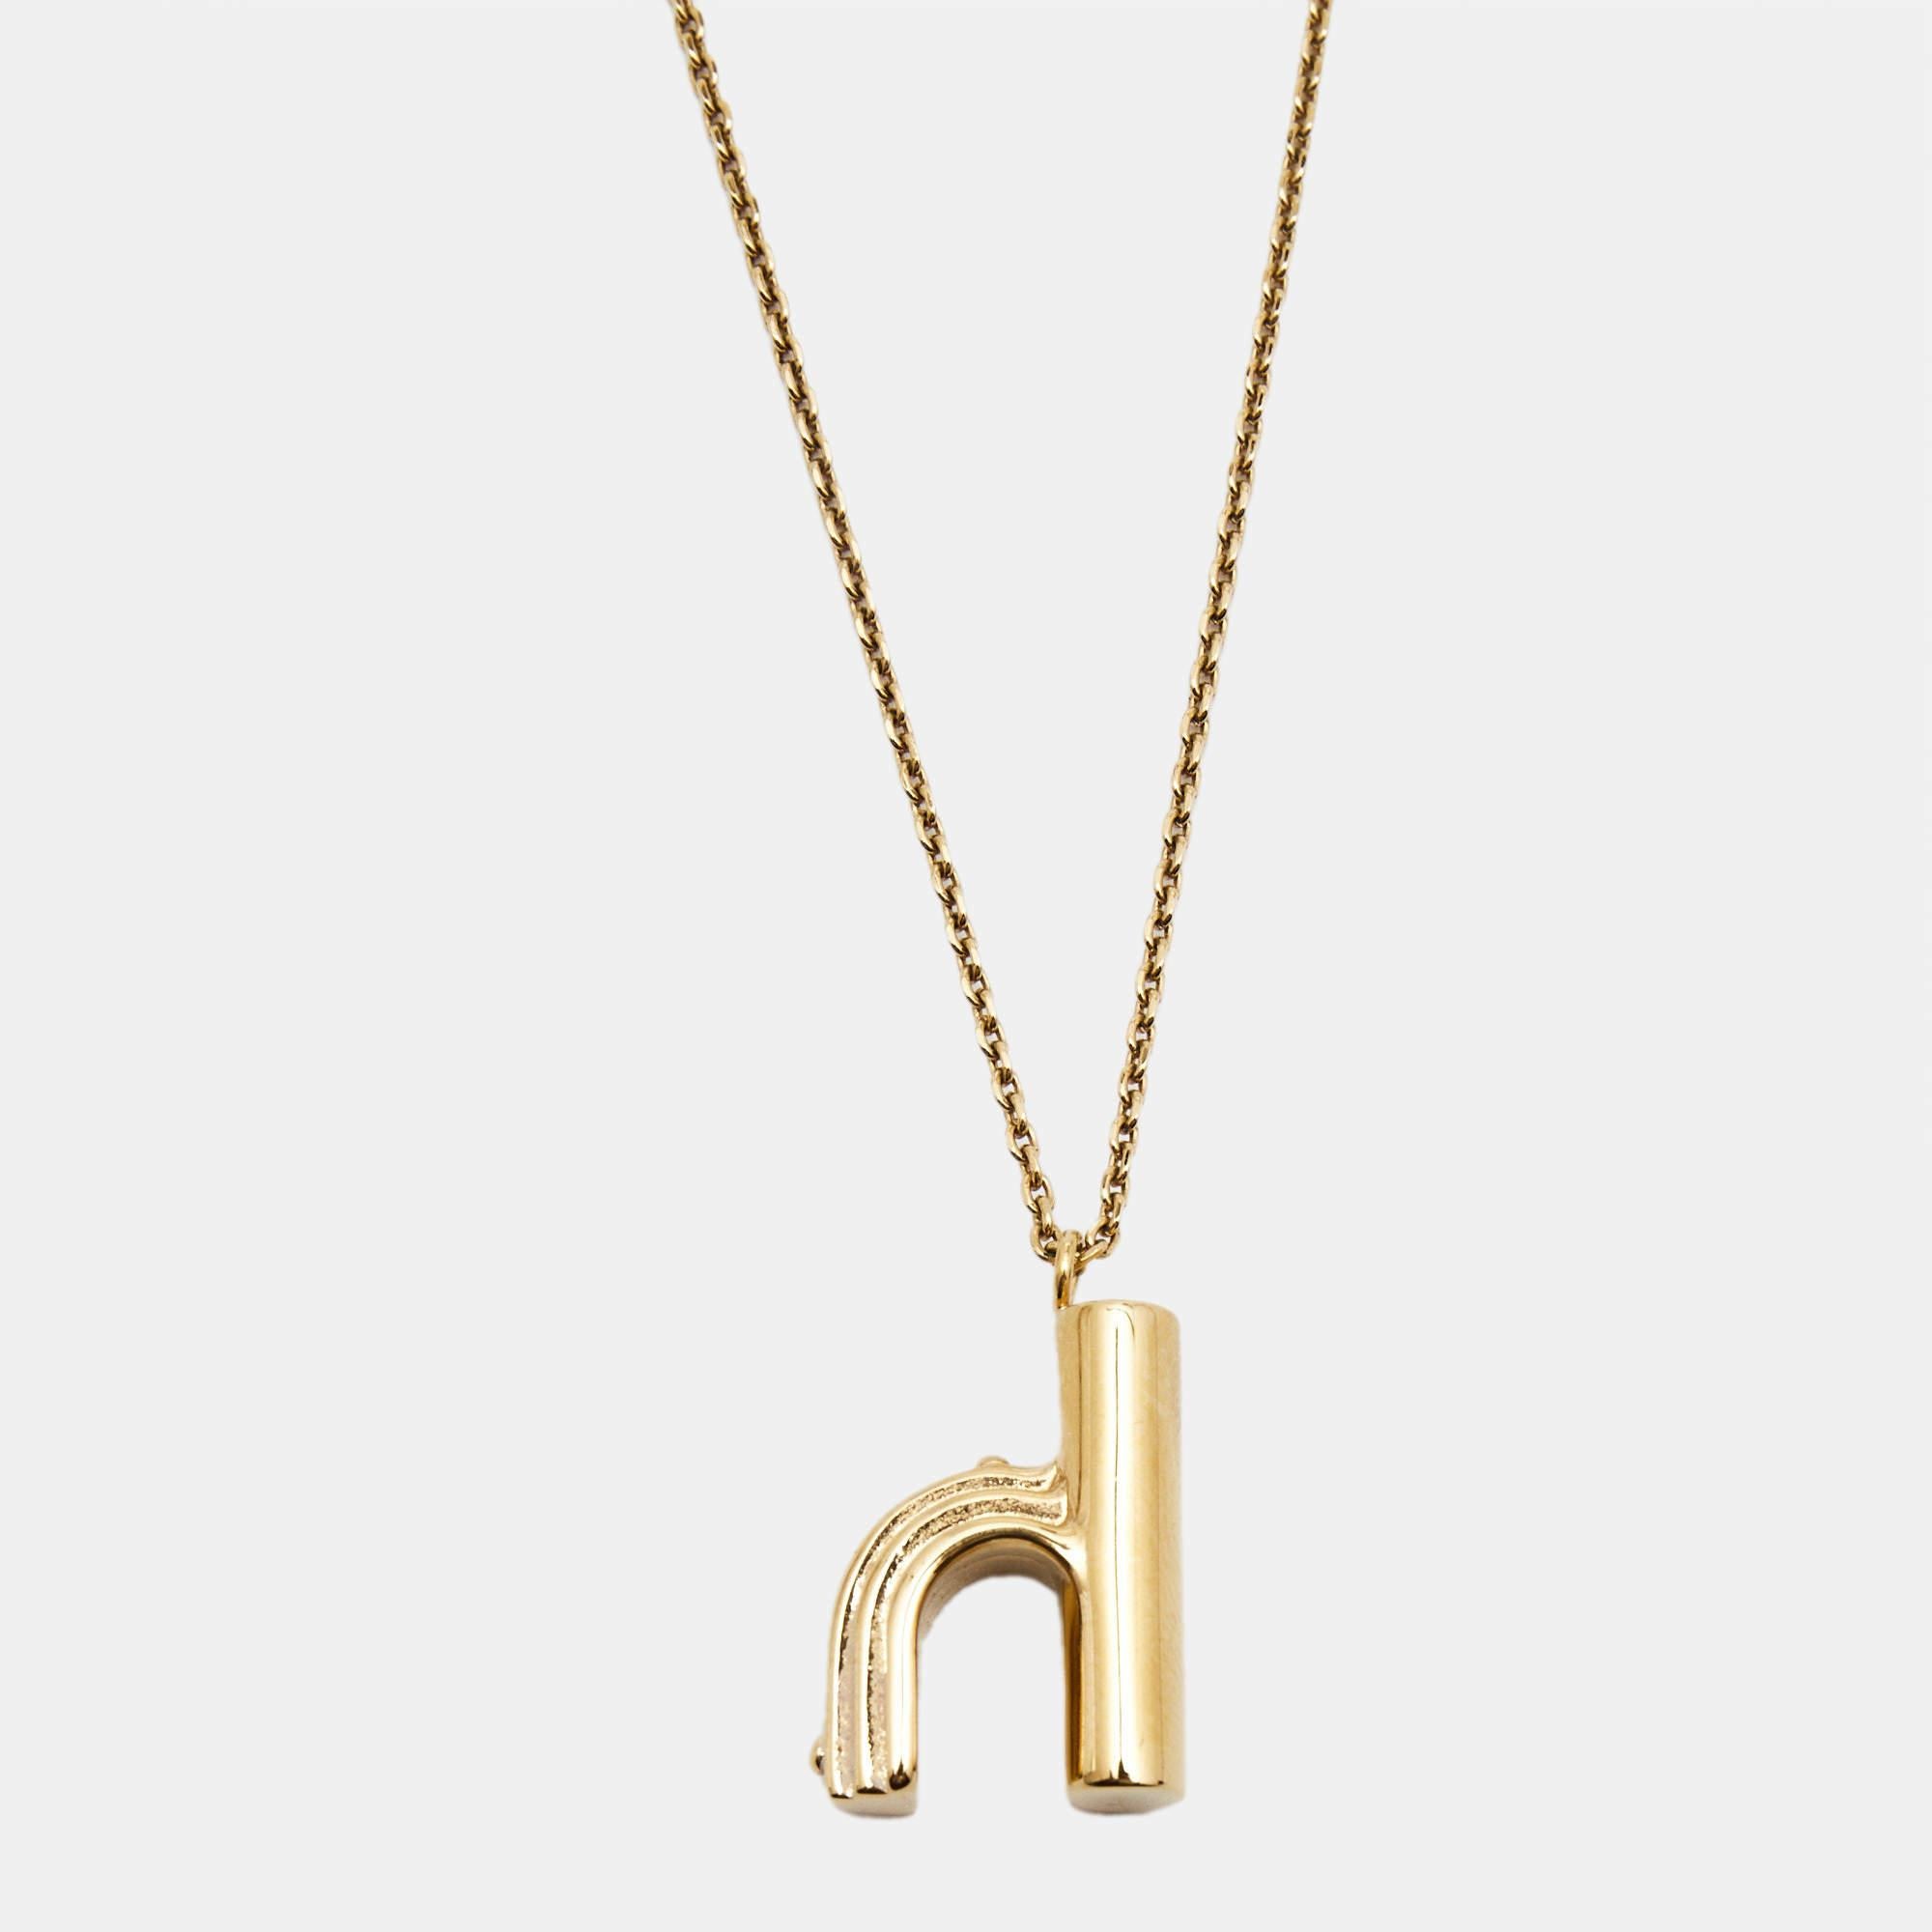 The Louis Vuitton LV & Me necklace is a luxurious fashion accessory. It features a gold-tone chain adorned with sparkling crystals and a pendant in the shape of the letter 